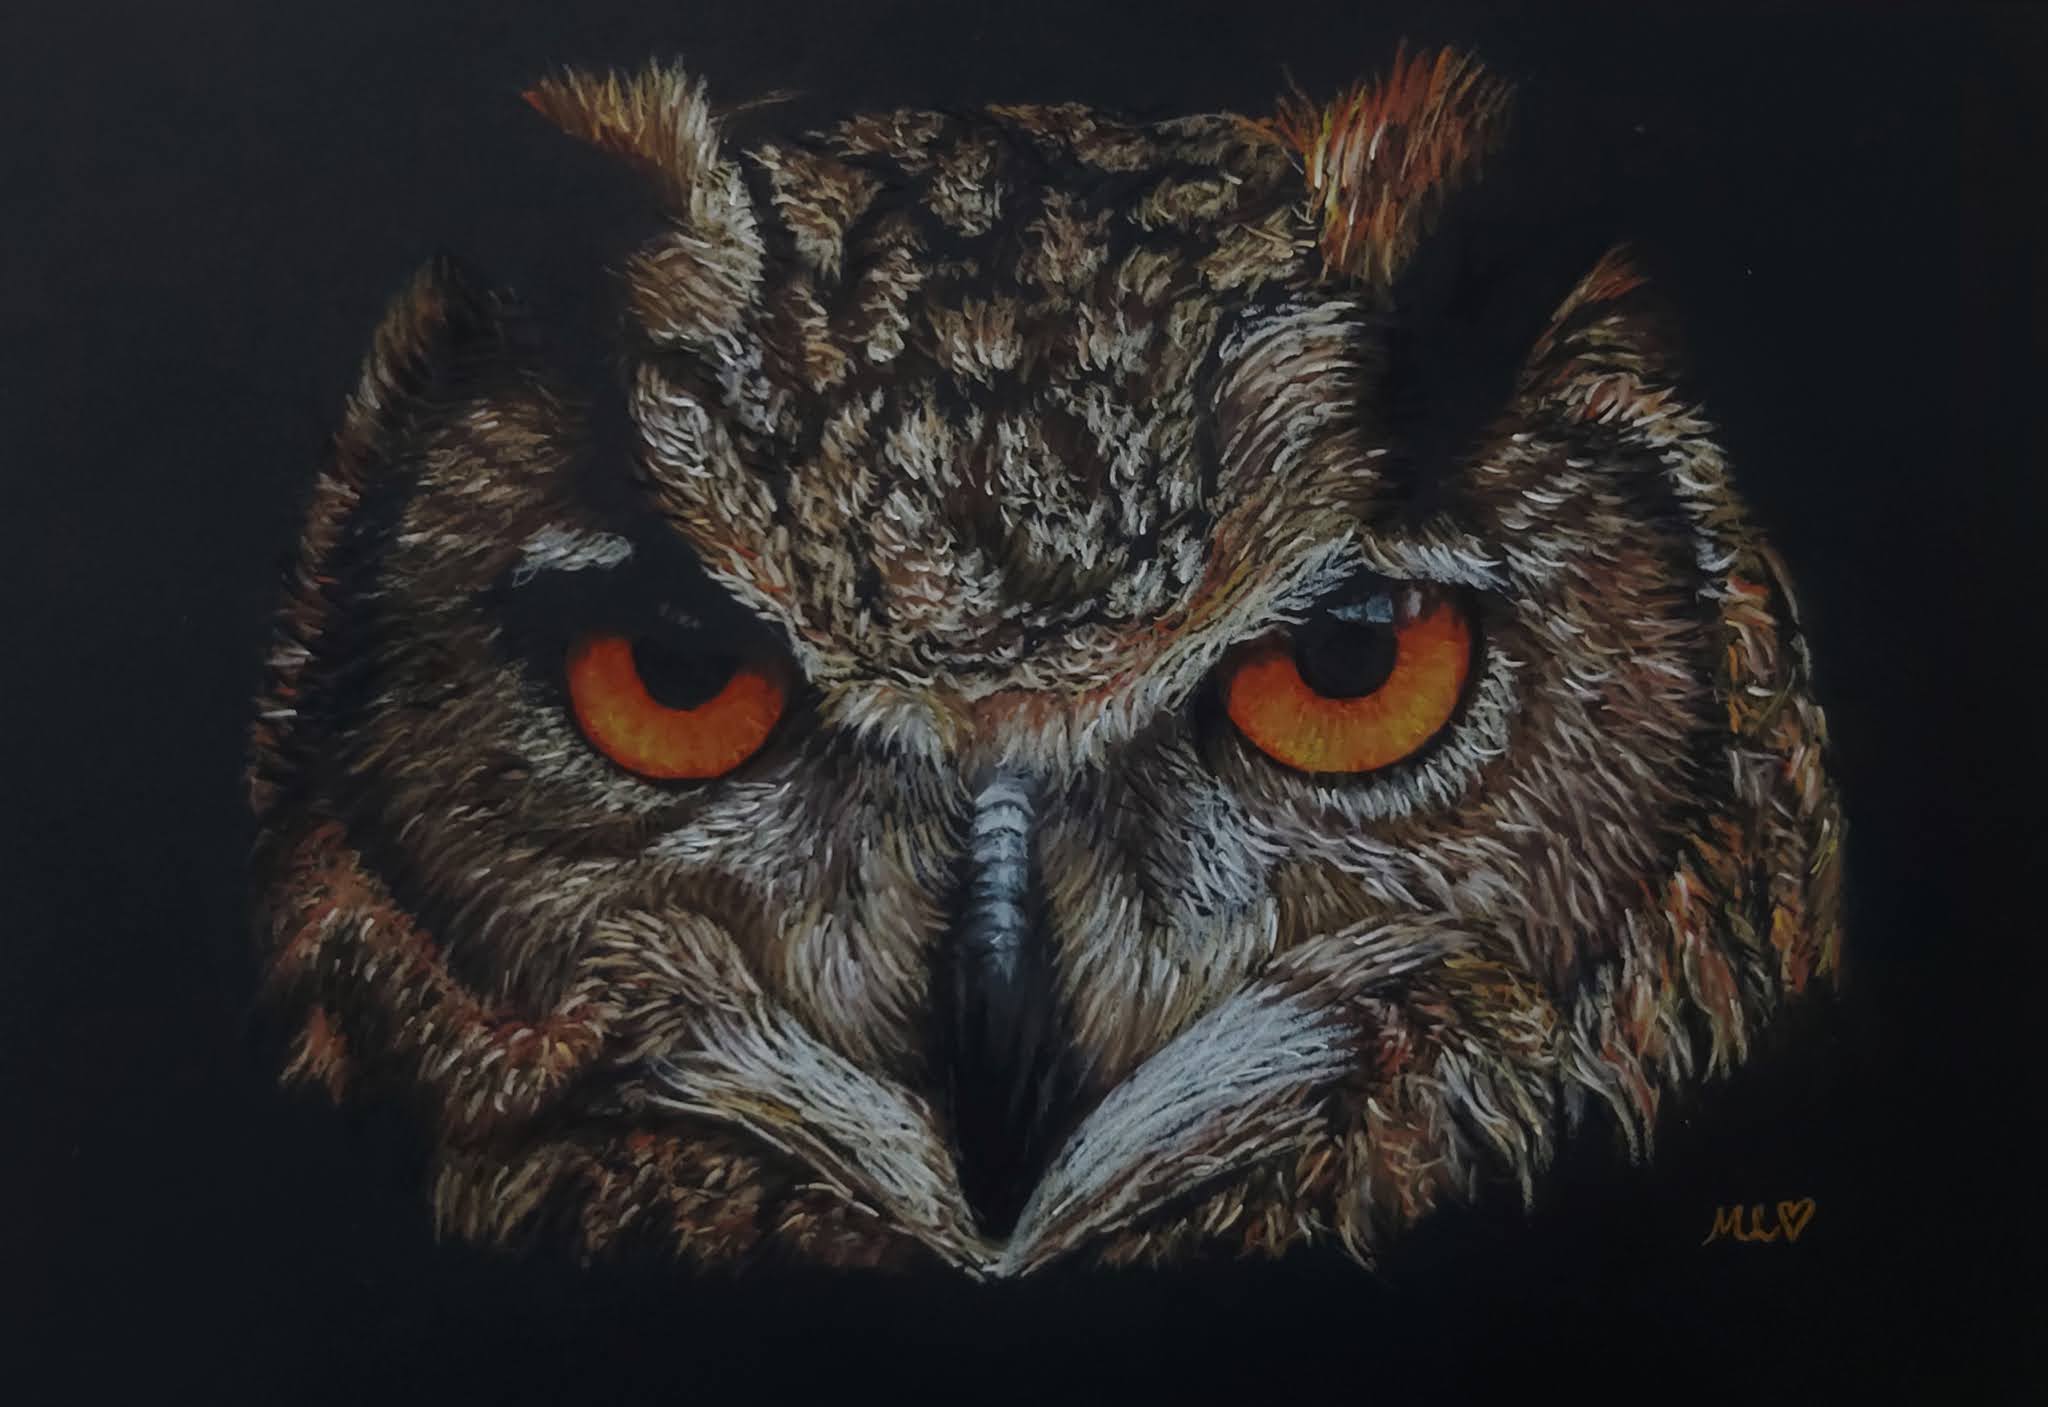 Drawing on black paper with pastel pencils, coloured pencils and